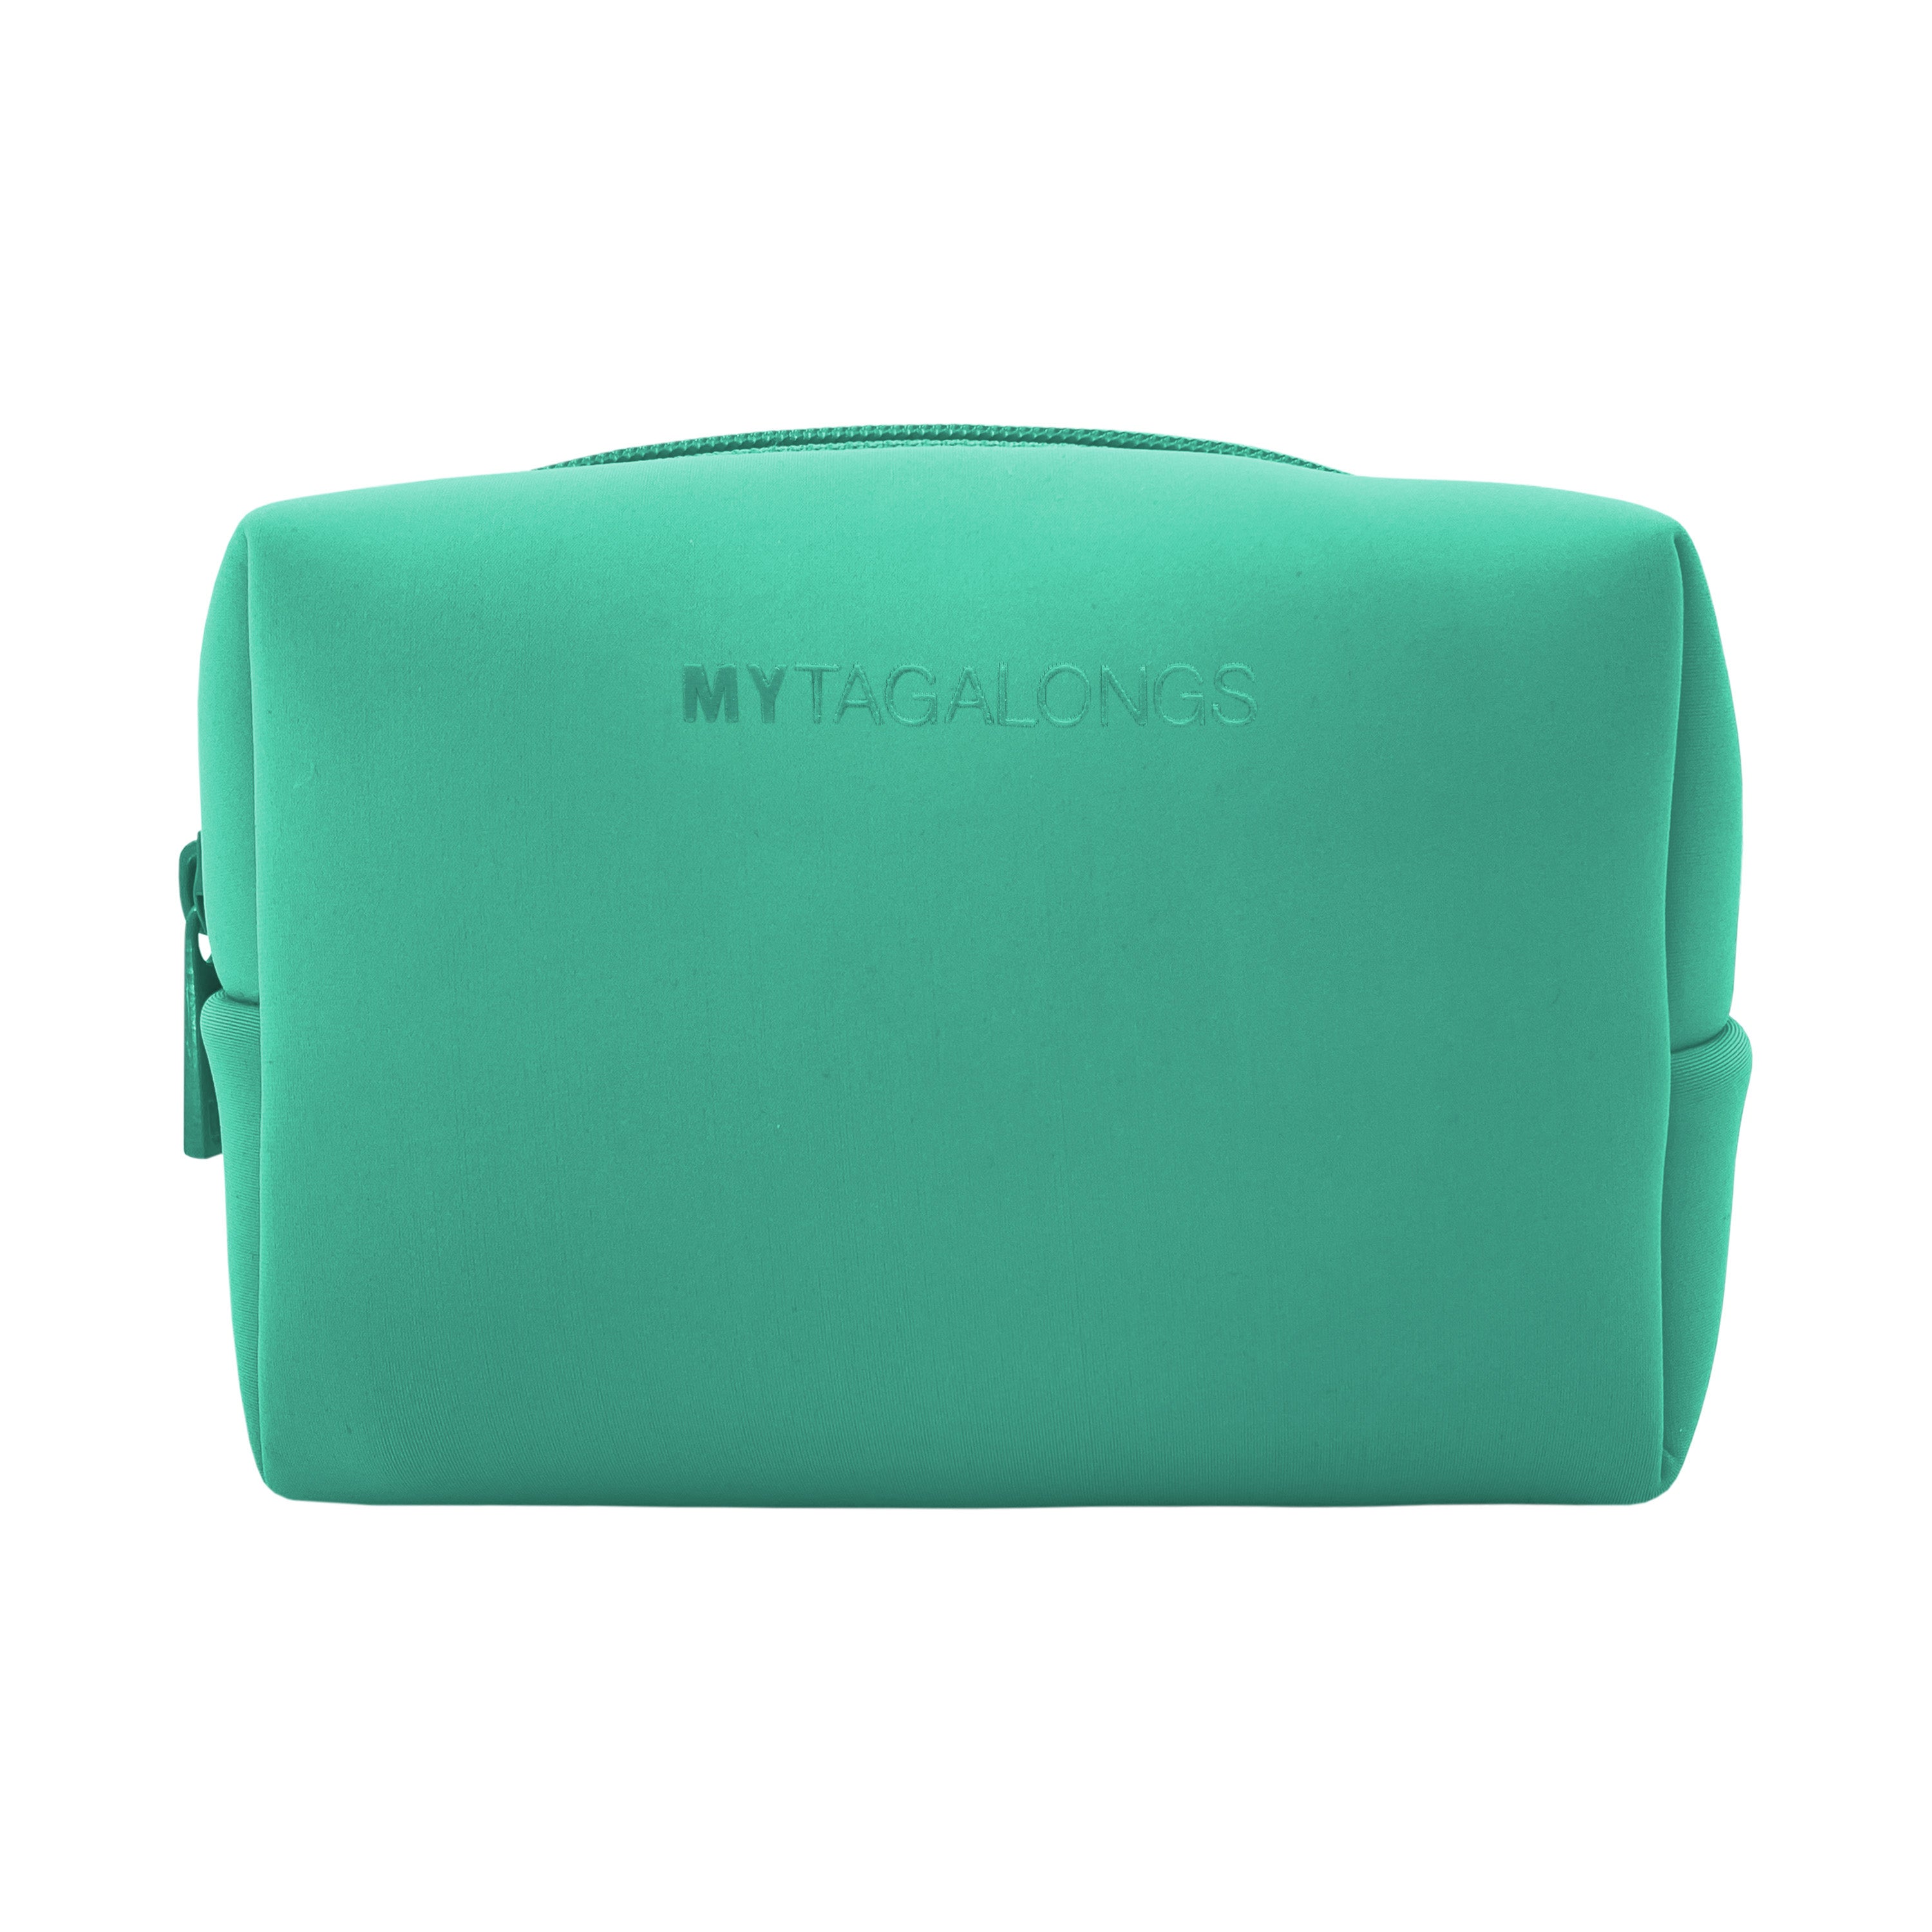 Clover cosmetic and makeup case made of neoprene